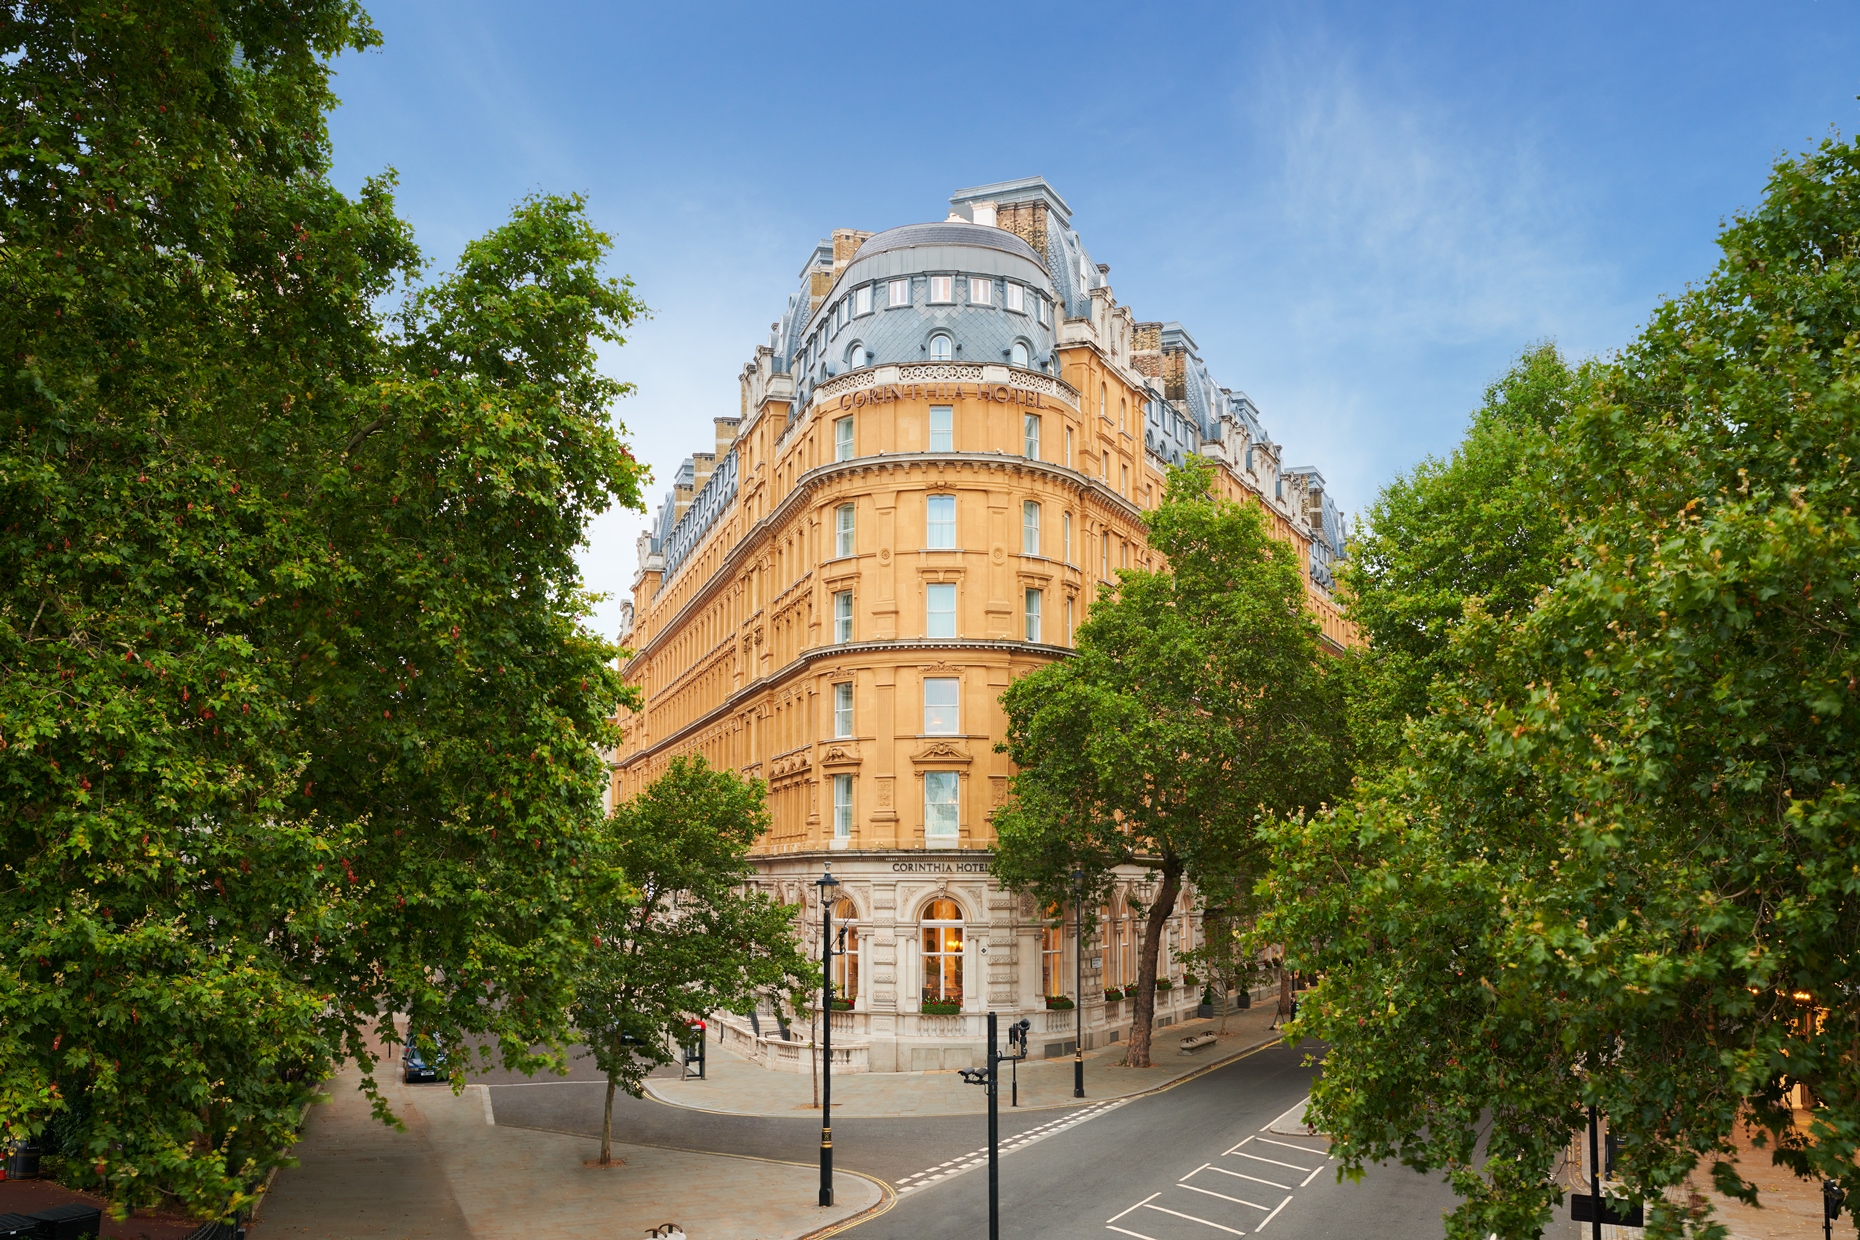 Exterior of the Corinthia Hotel n London, from the bridge